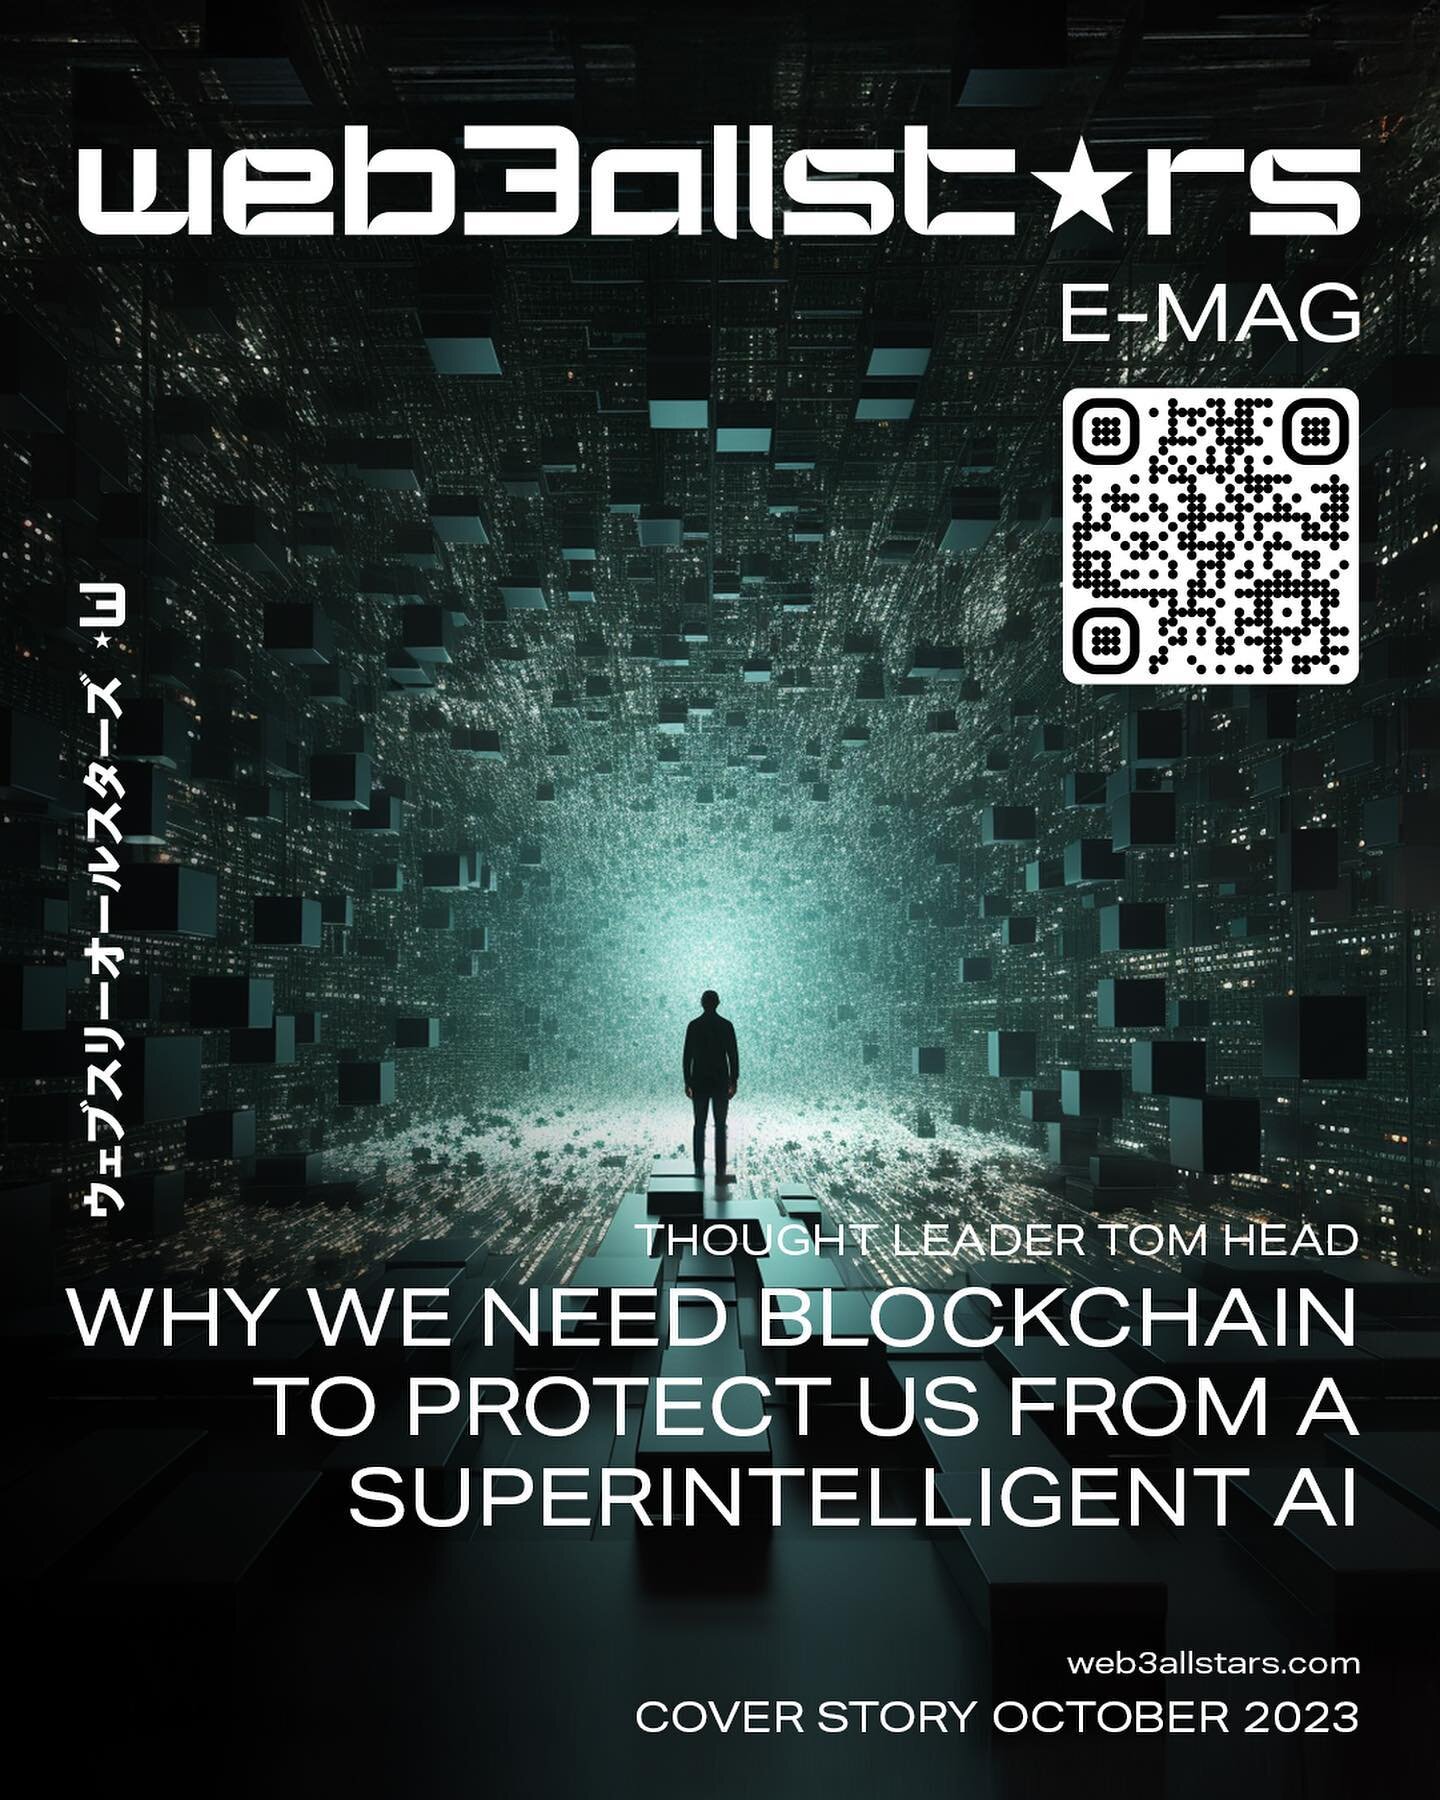 Our coverstory of the October issue is dealing with the fact that superintelligent AI could soon go rogue. Learn why blockchain could be our best chance to control the uncontrollable and get some great insides from thought leader Tom Head from G3NR8.